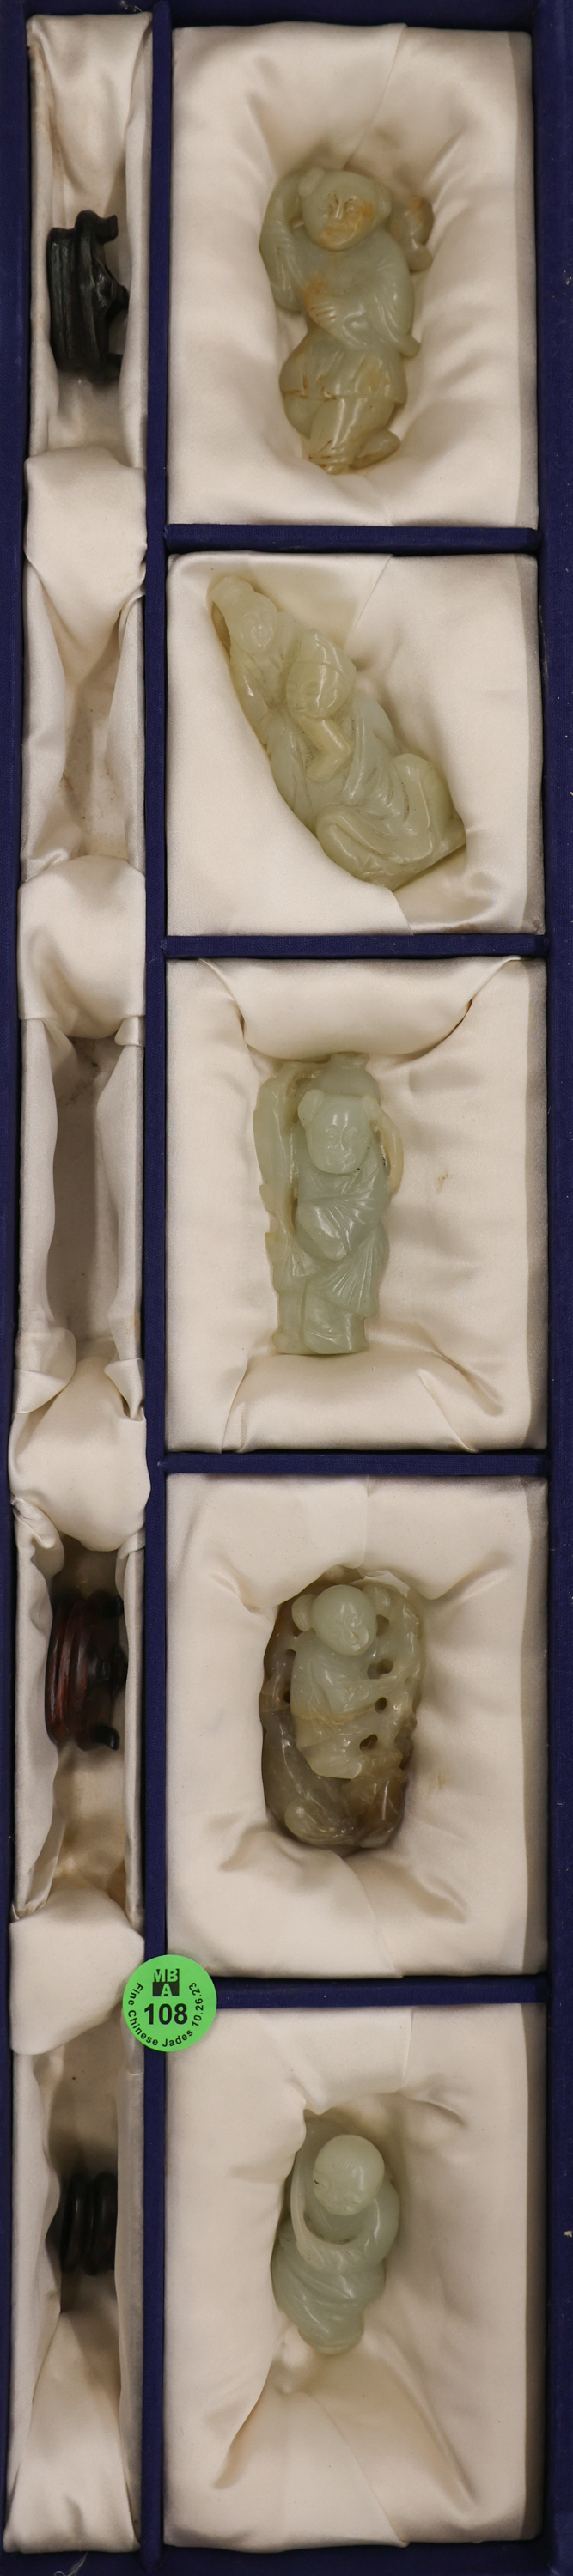 5pc Chinese Jade Standing Figure 3afe79